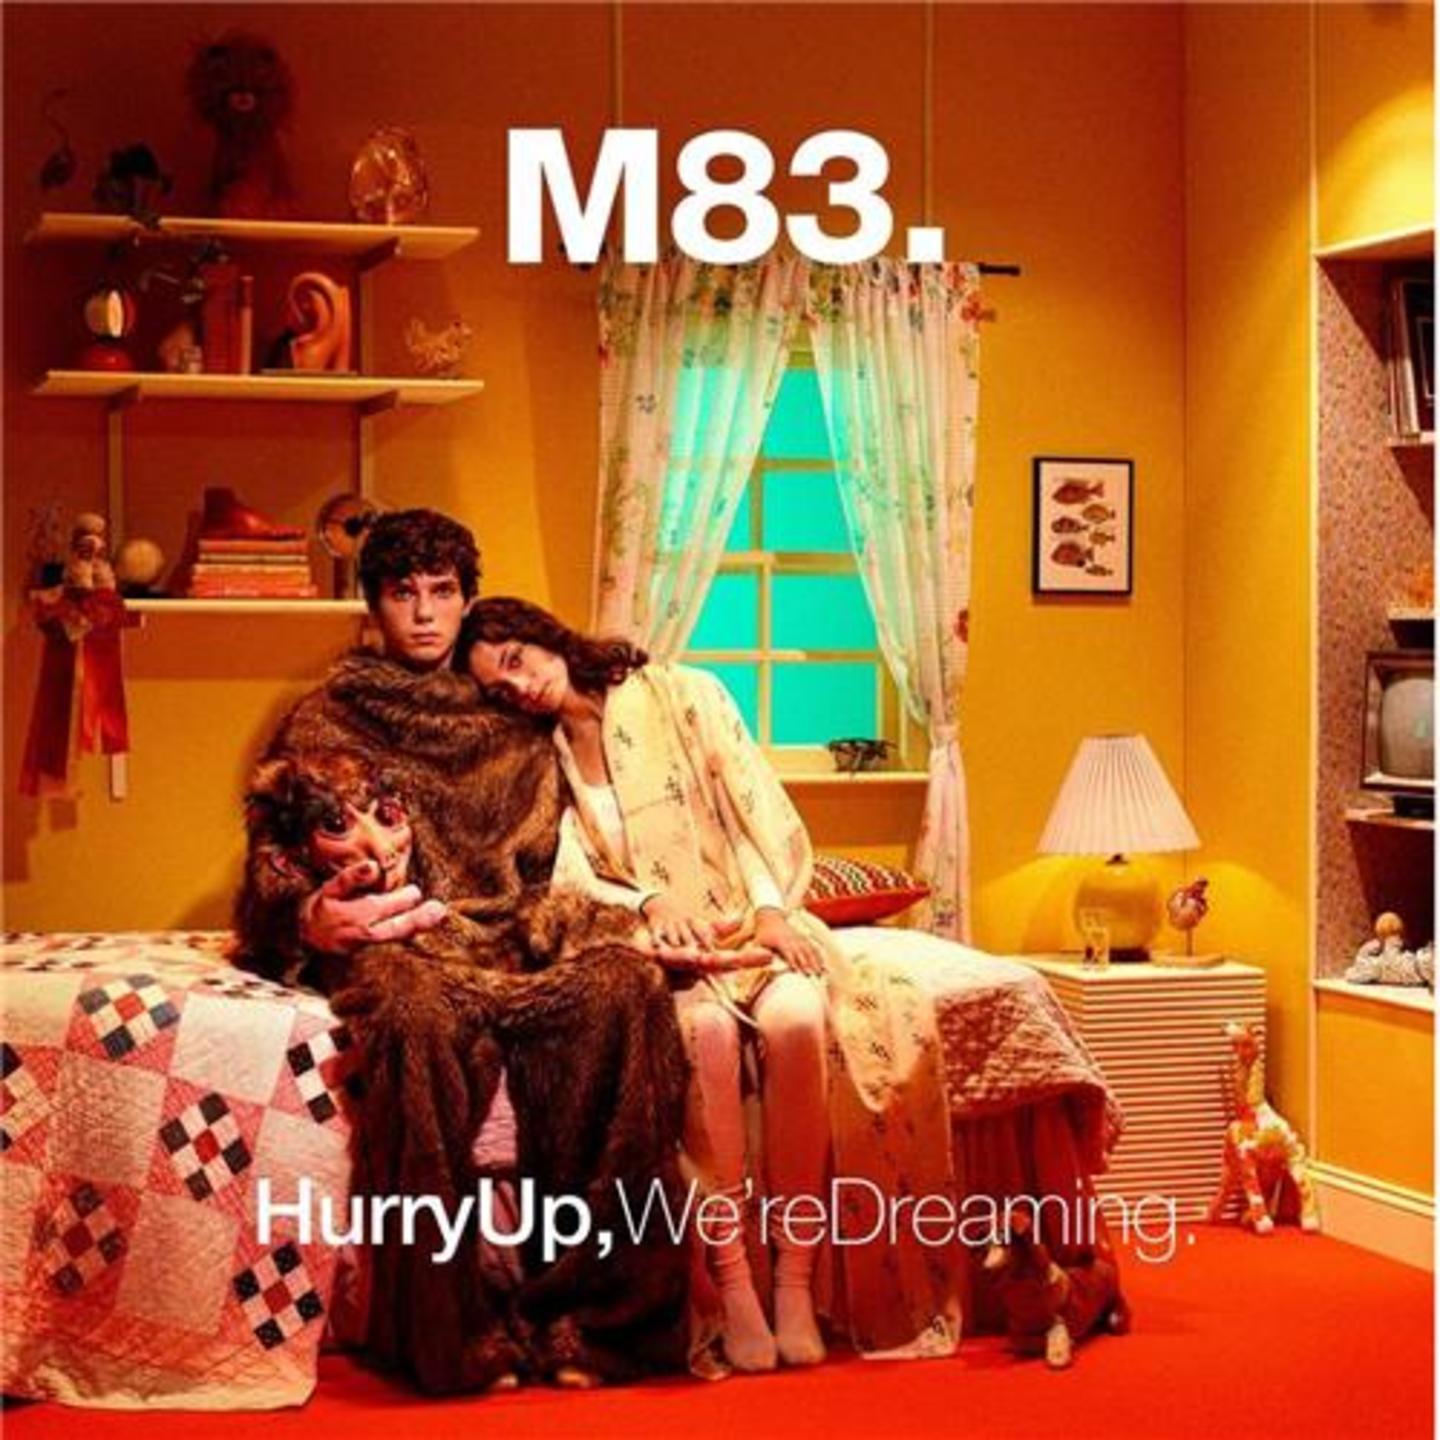 M83 - Hurry Up, Were Dreaming 10th Anniversary Limited Edition, Orange Vinyl 2xLP